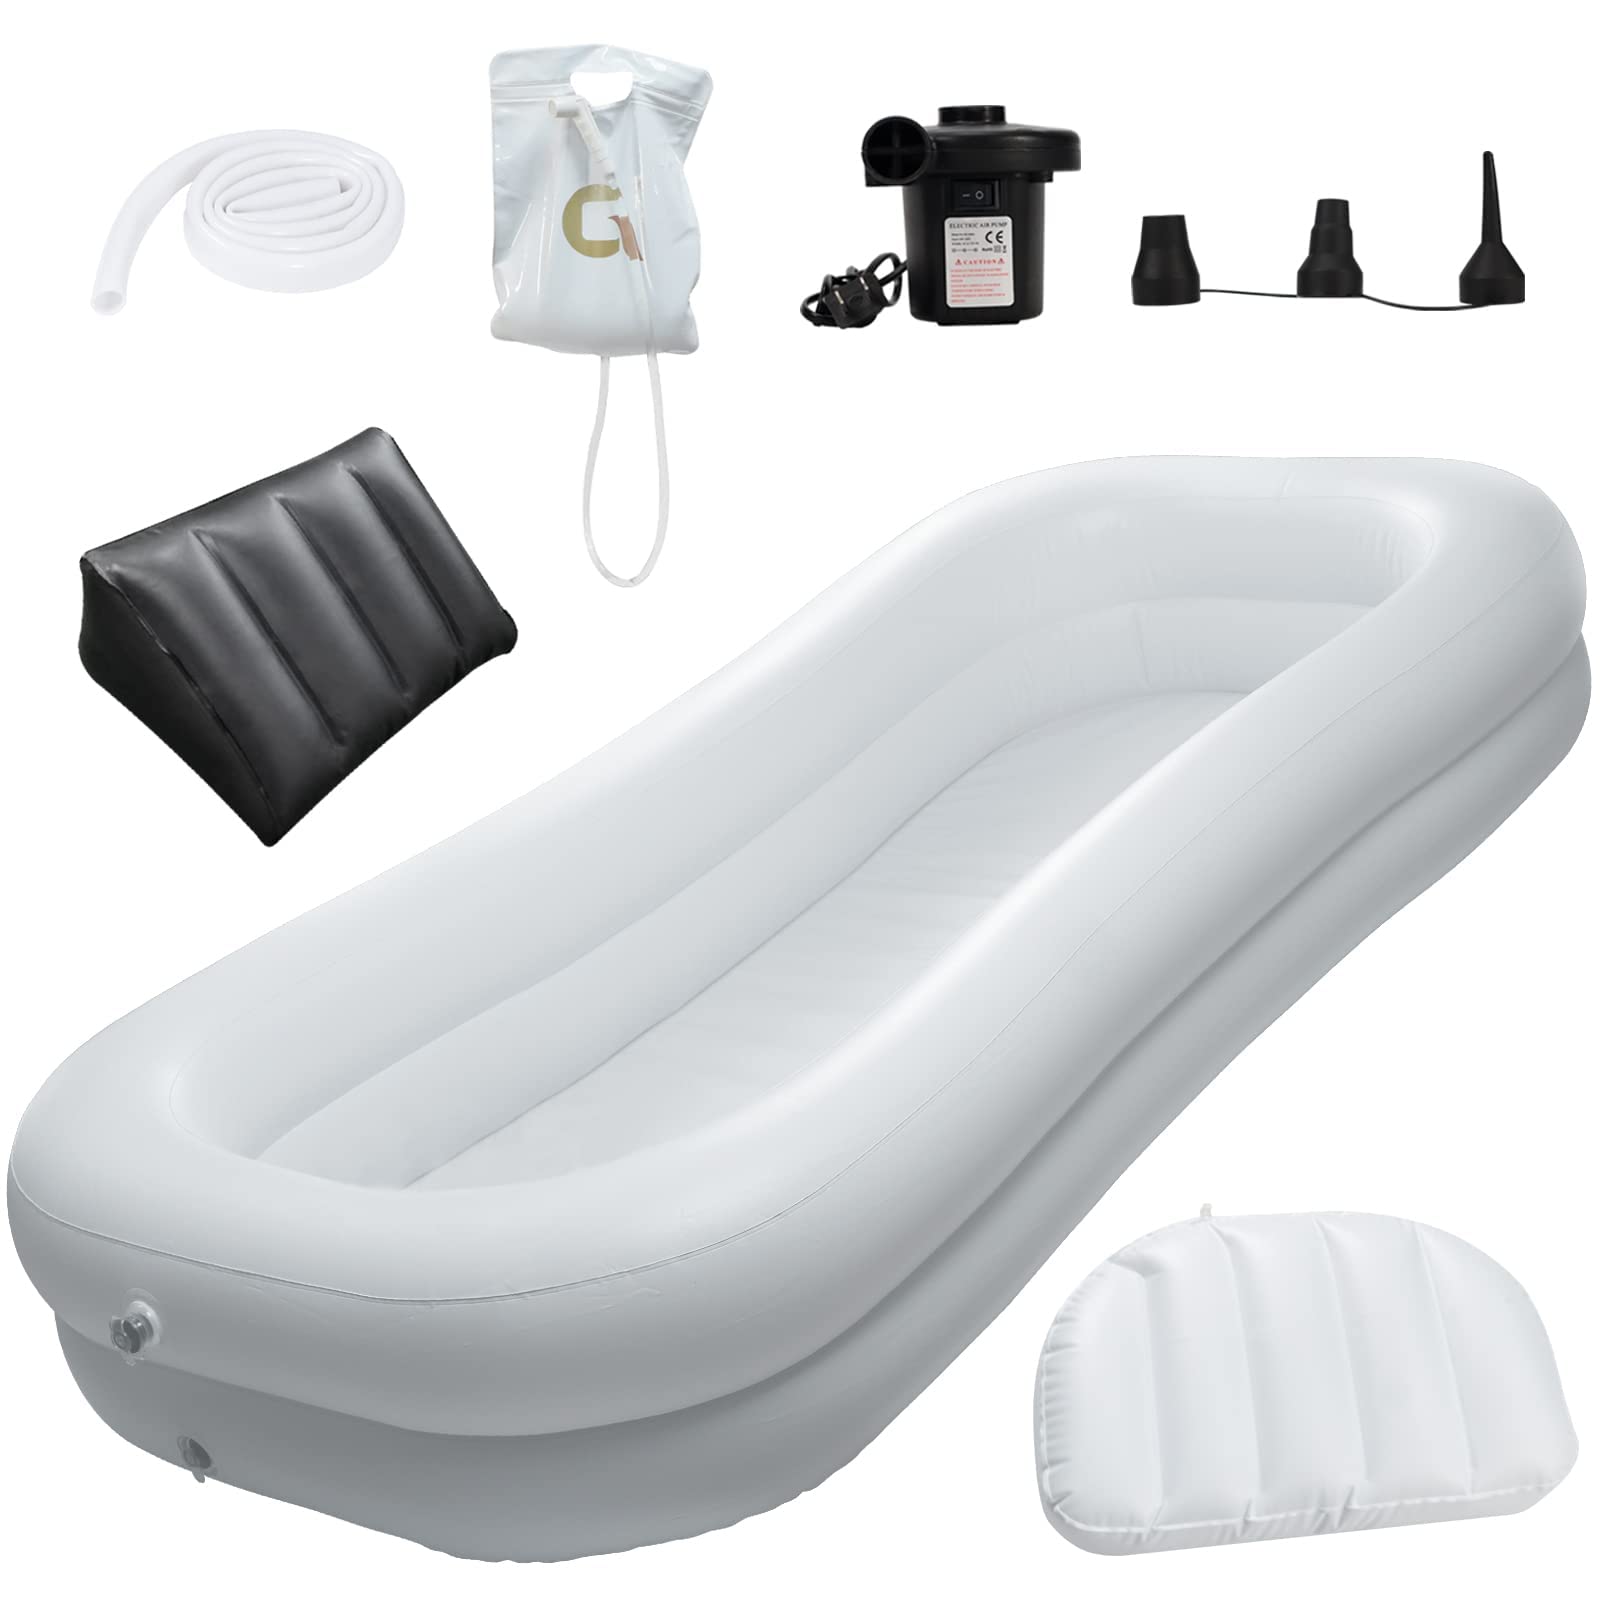 Flieeya Medical Inflatable Bathtub W/Electric Air Pump Adult PVC Bathtub with Water Bag Bath in Bed Assistive aid W/Air Pillow for The Elderly, Disabled, Seniors, Bedridden Patients, Handicapped